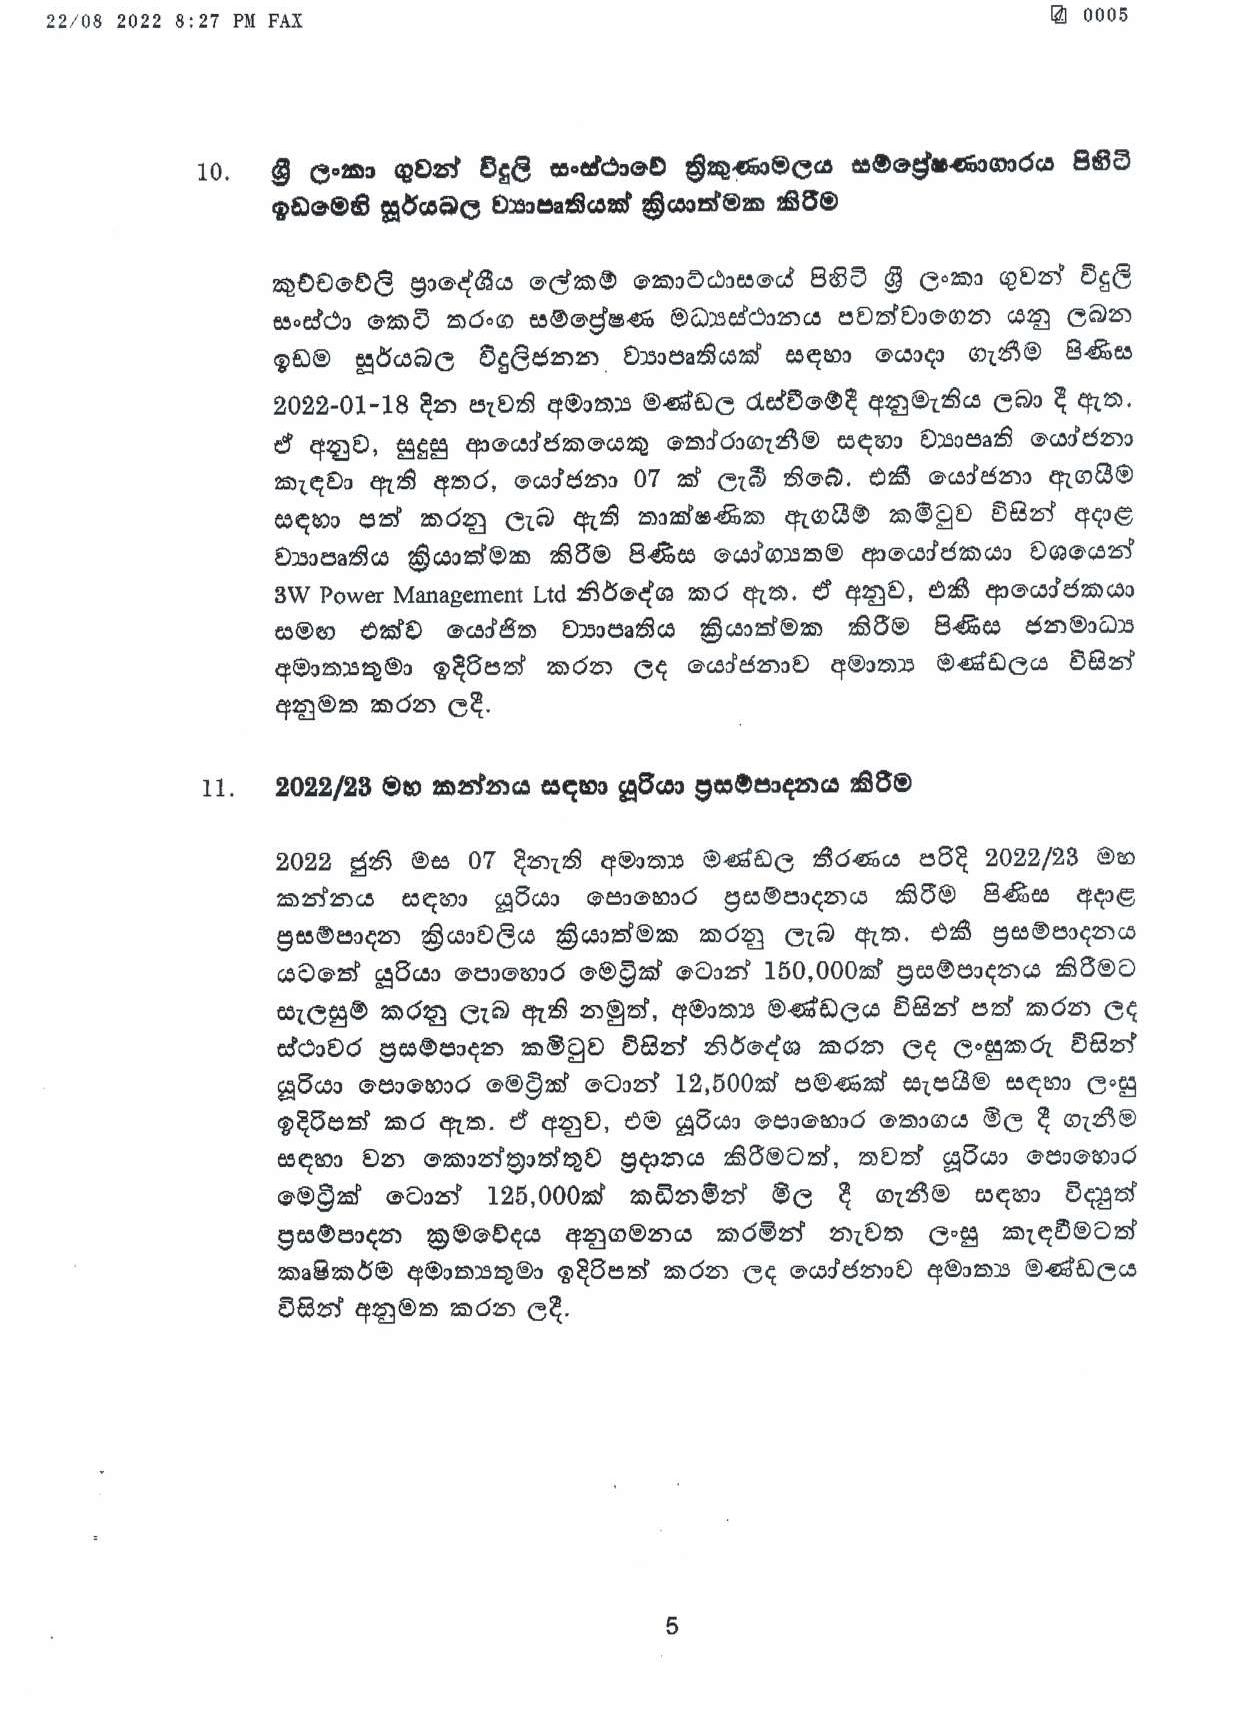 Cabinet decision on 22.08.2022 page 005